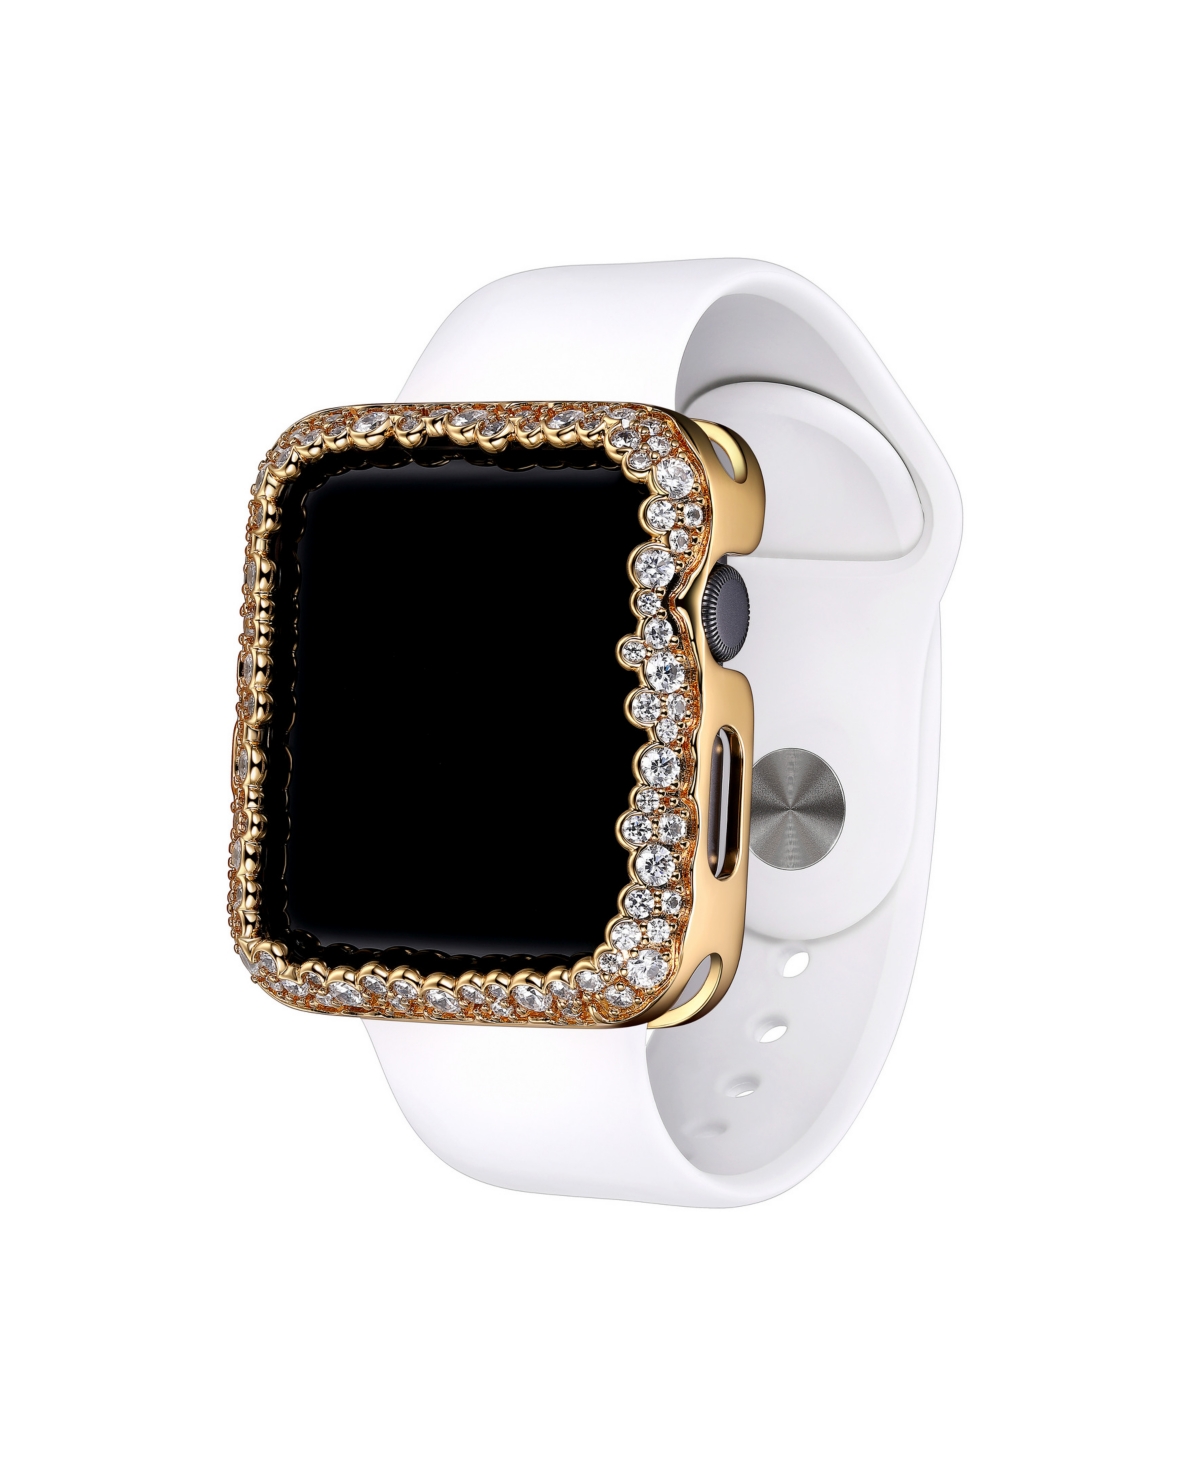 Champagne Bubbles Apple Watch Case, Series 1-3, 42mm - Gold-Tone